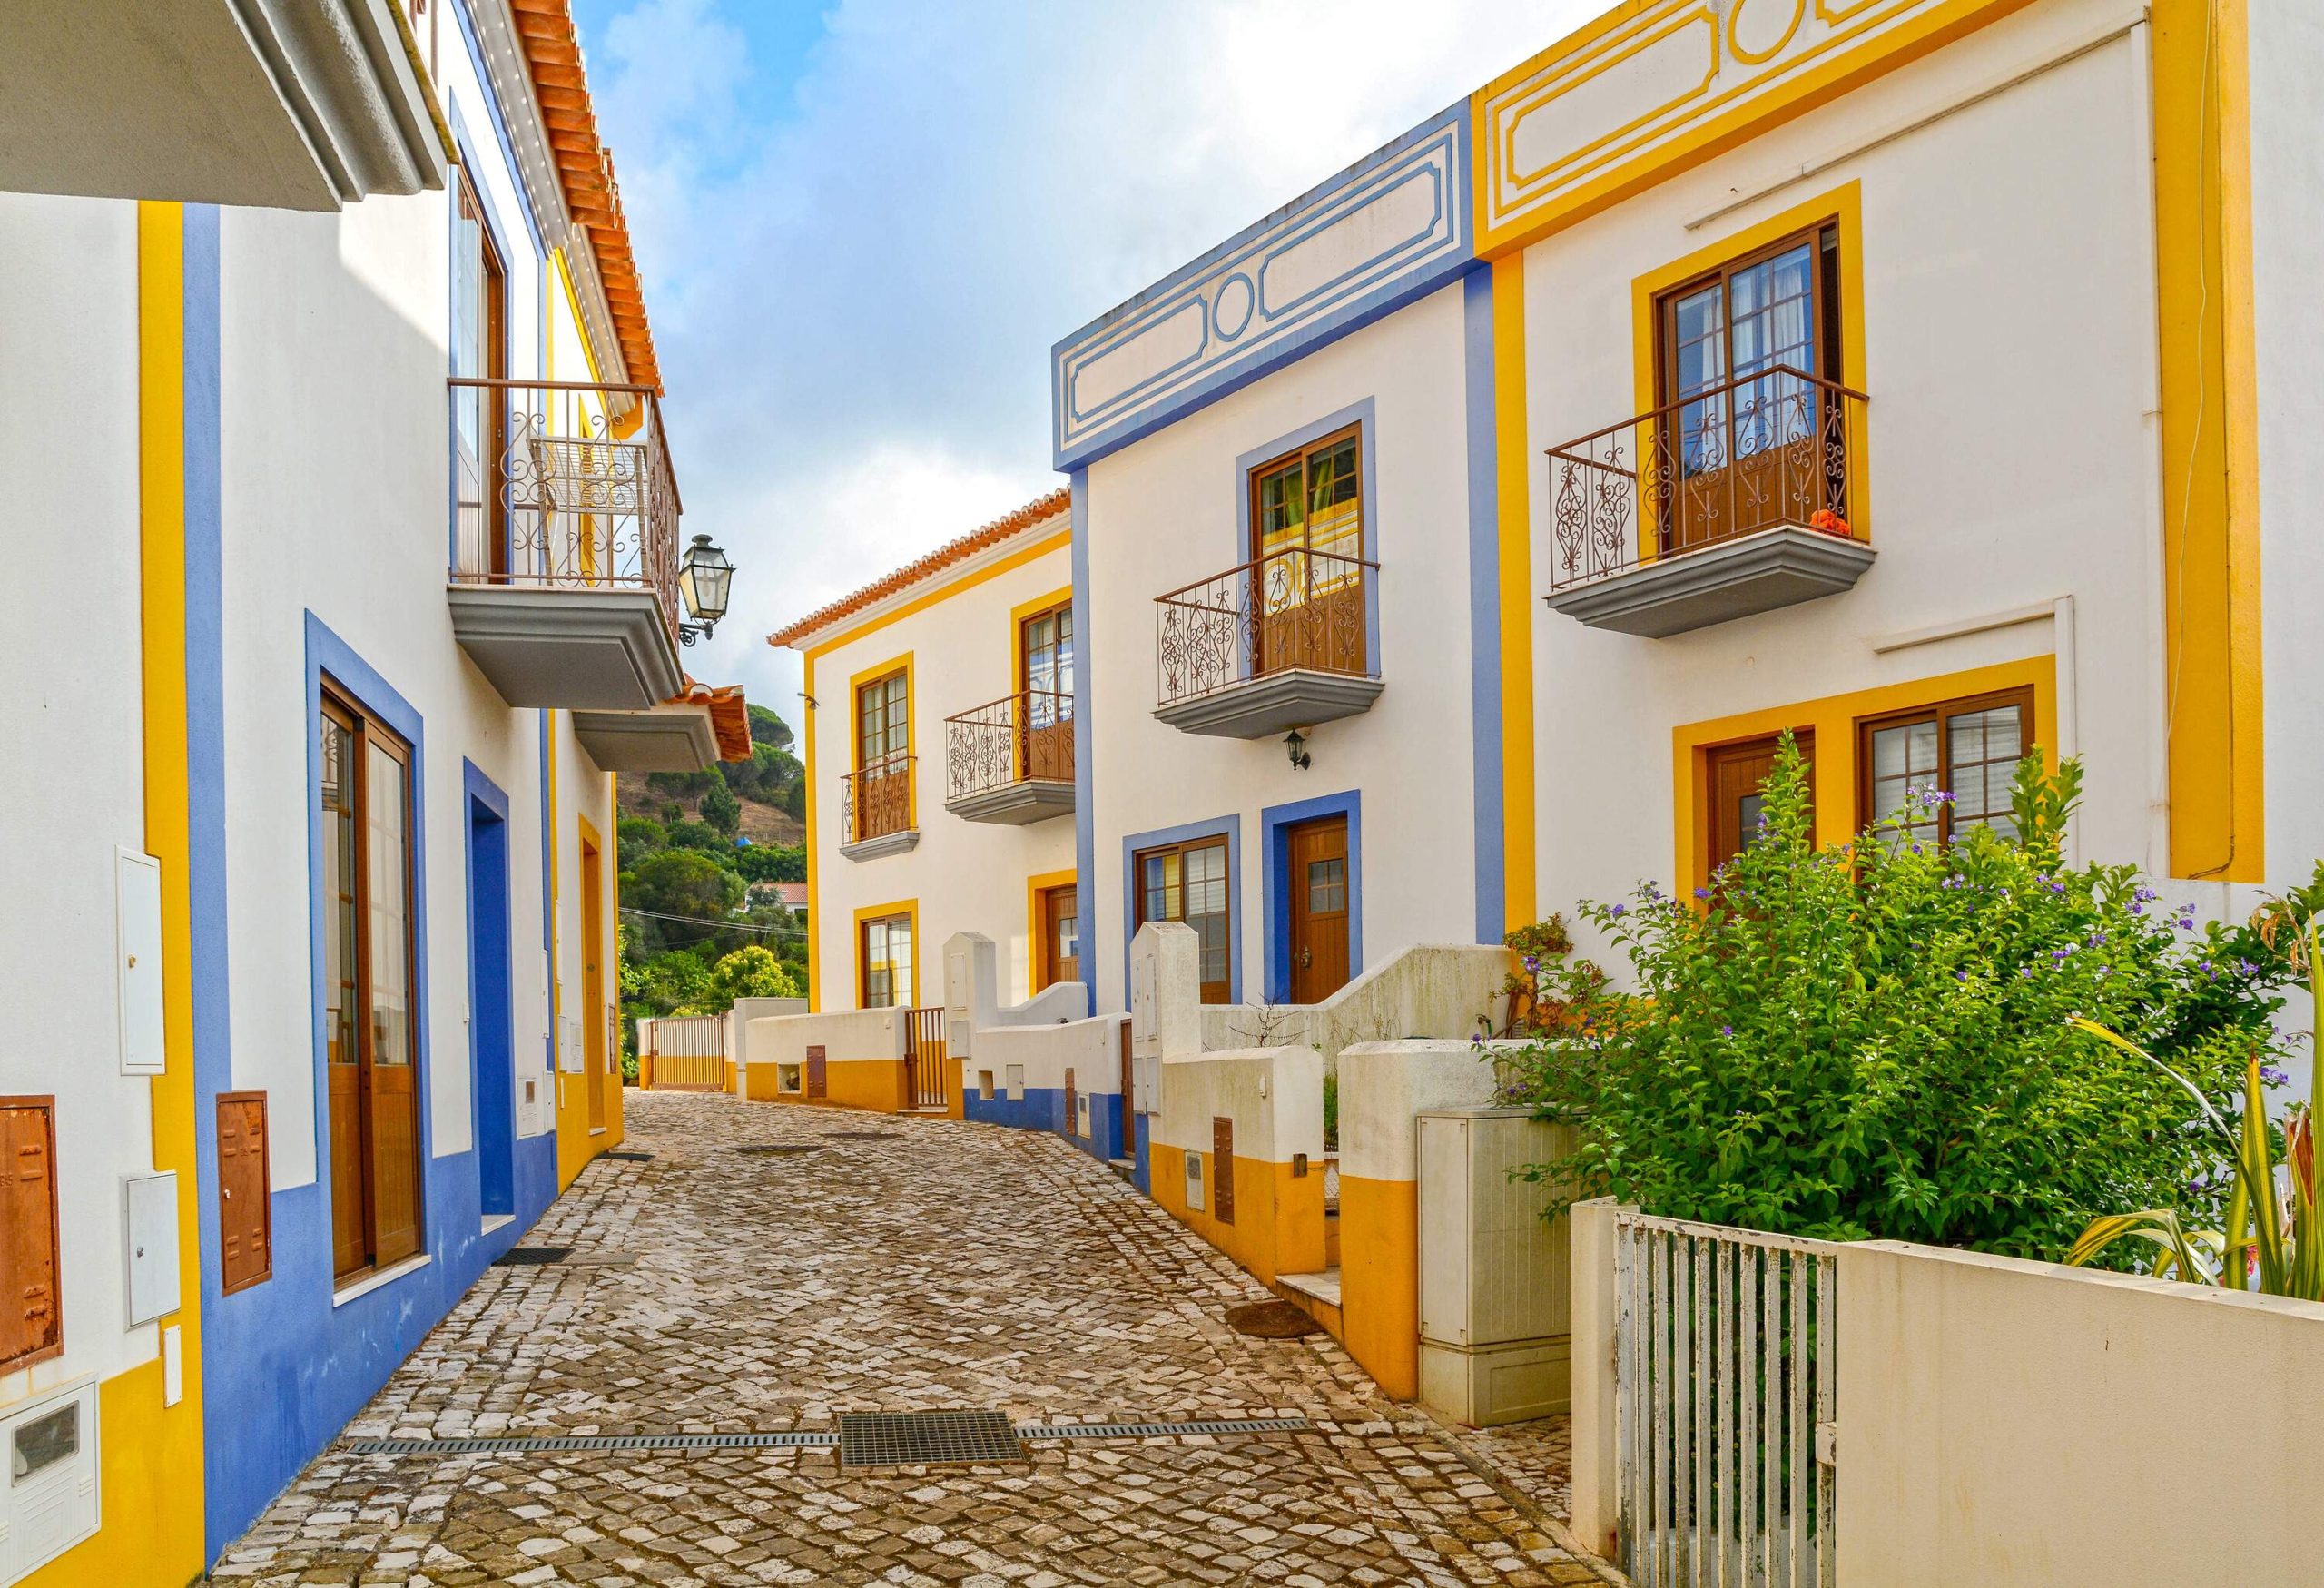 Cobblestone streets lined with colourful, identical houses painted white with alternating blue and yellow borders.